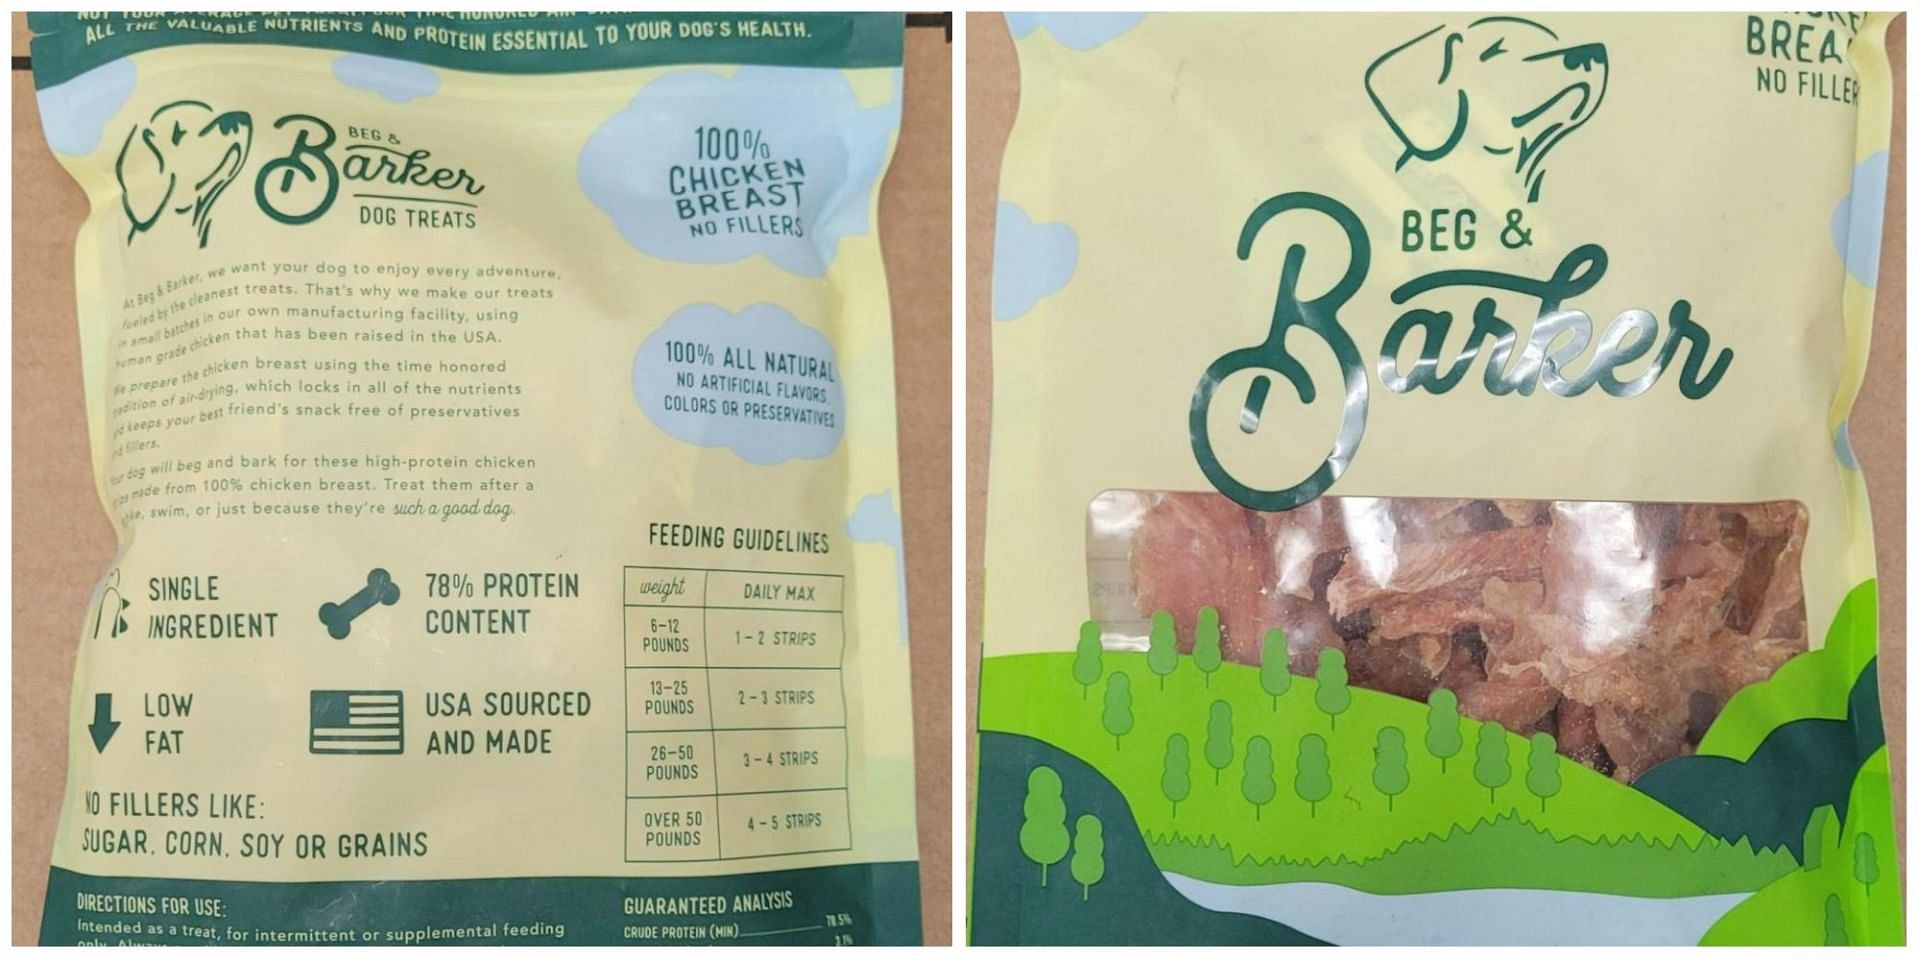 Exploring batch number and other details as Stormberg Foods recalls a range of their dog food items for possible contamination (Image via FDA)